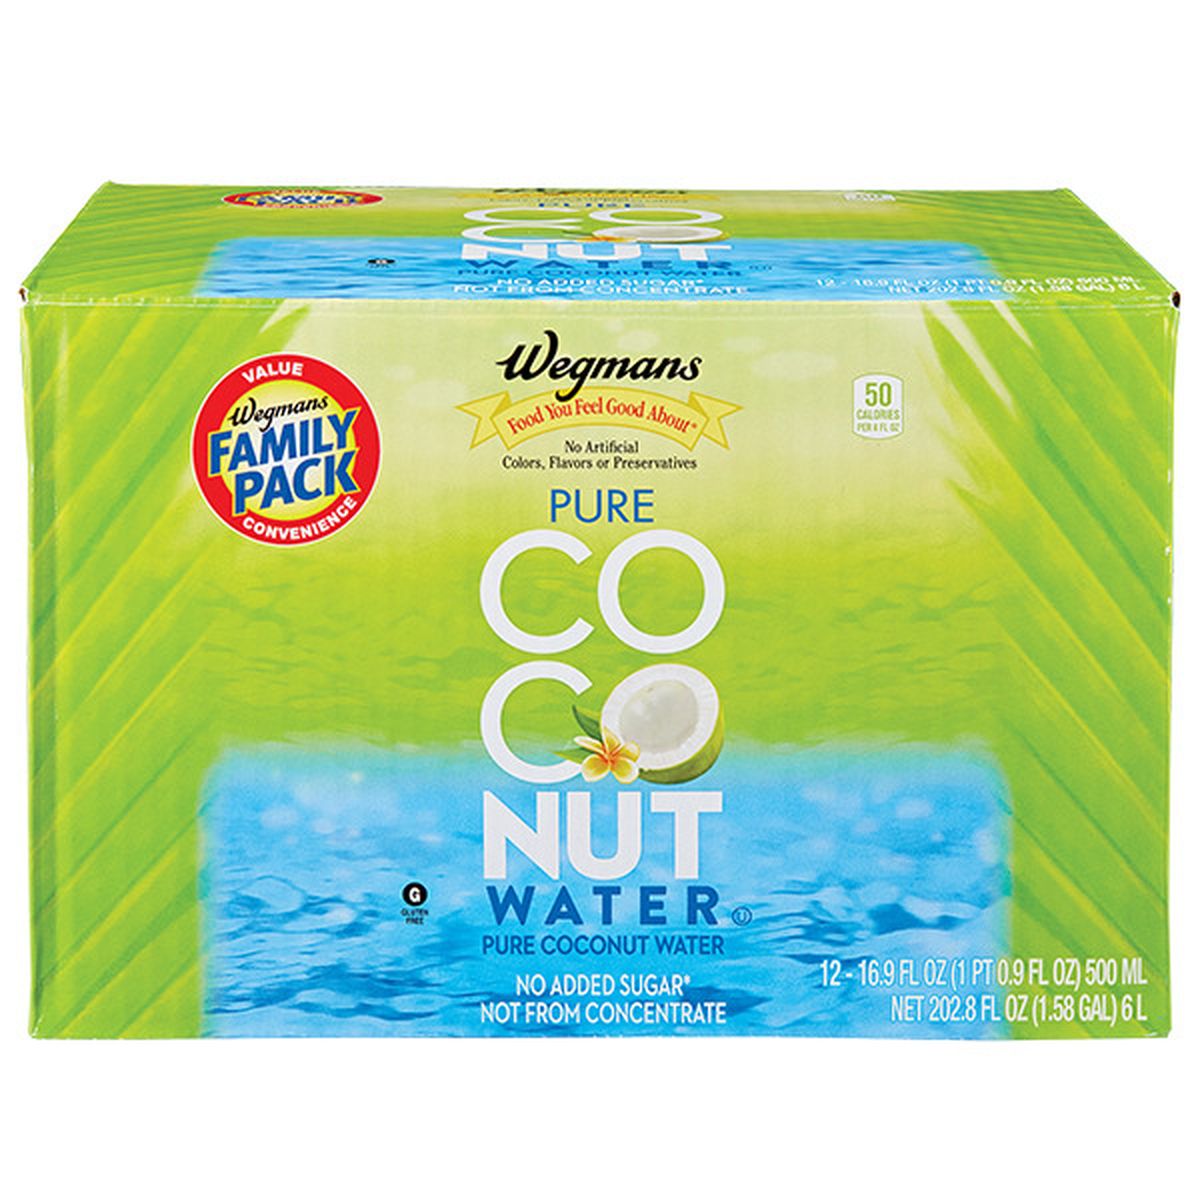 Calories in Wegmans Pure Coconut Water, FAMILY PACK